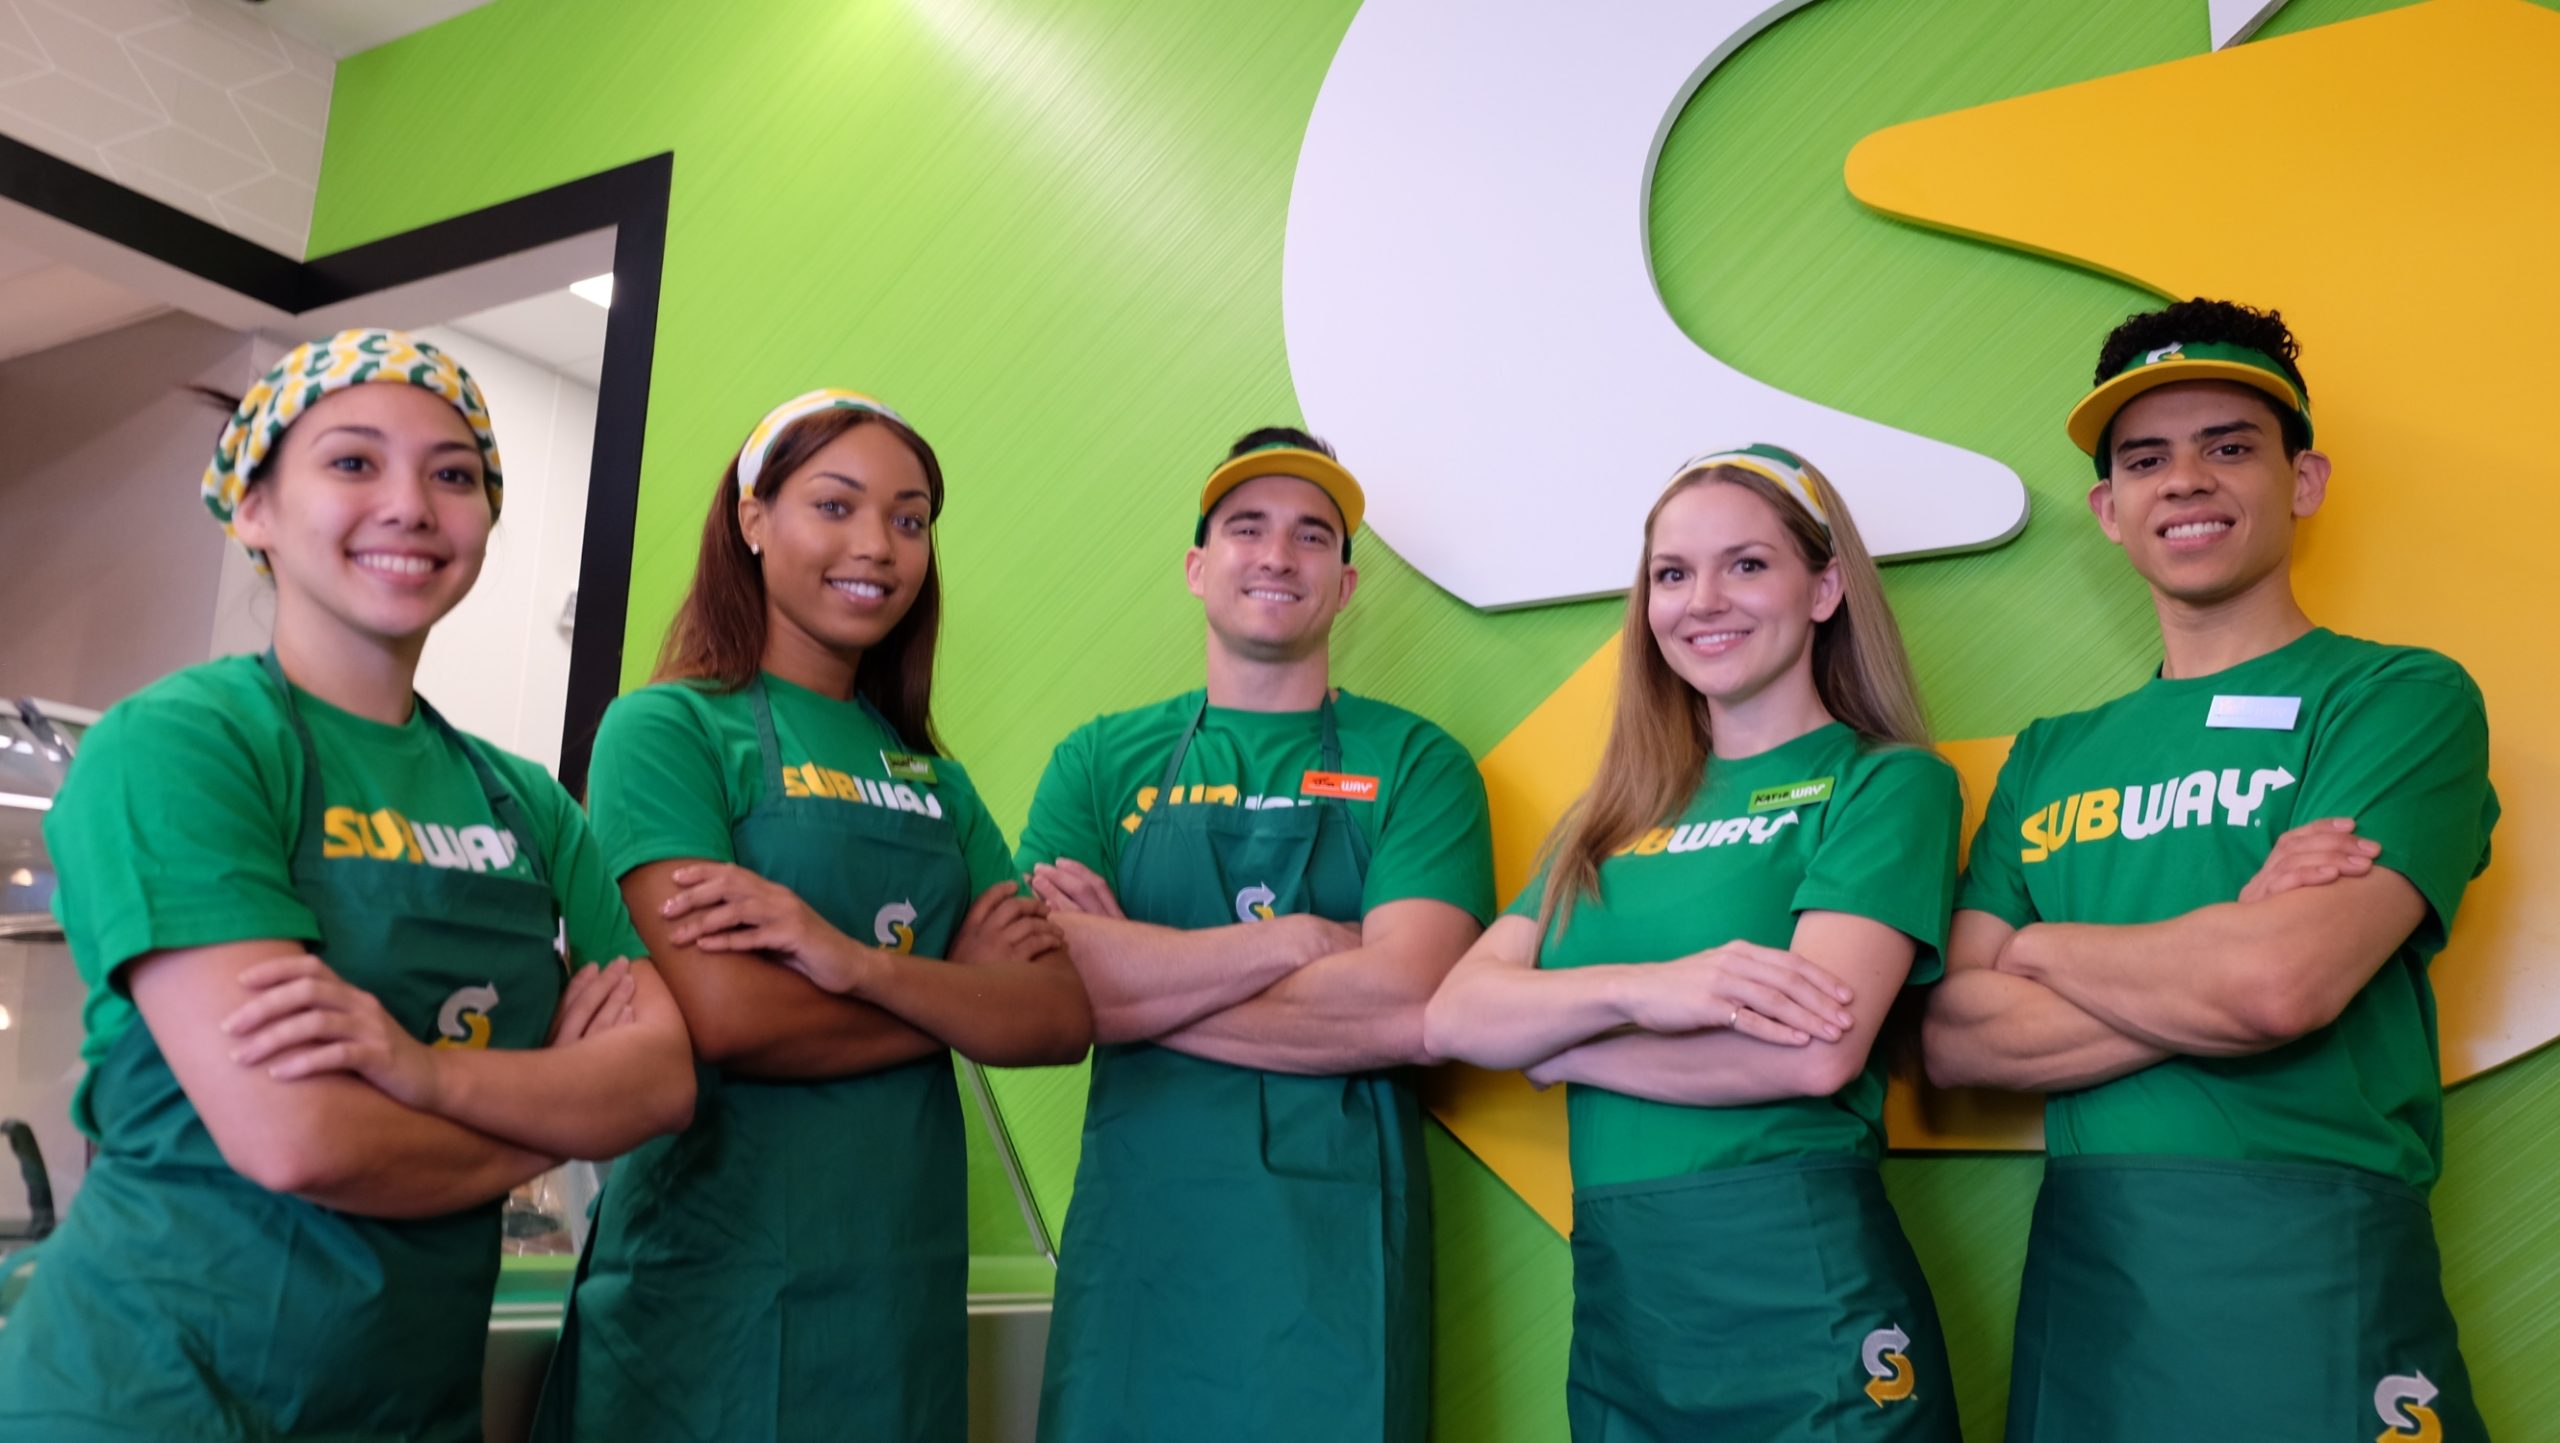 Subway: Crafting Careers in the Sandwich Industry